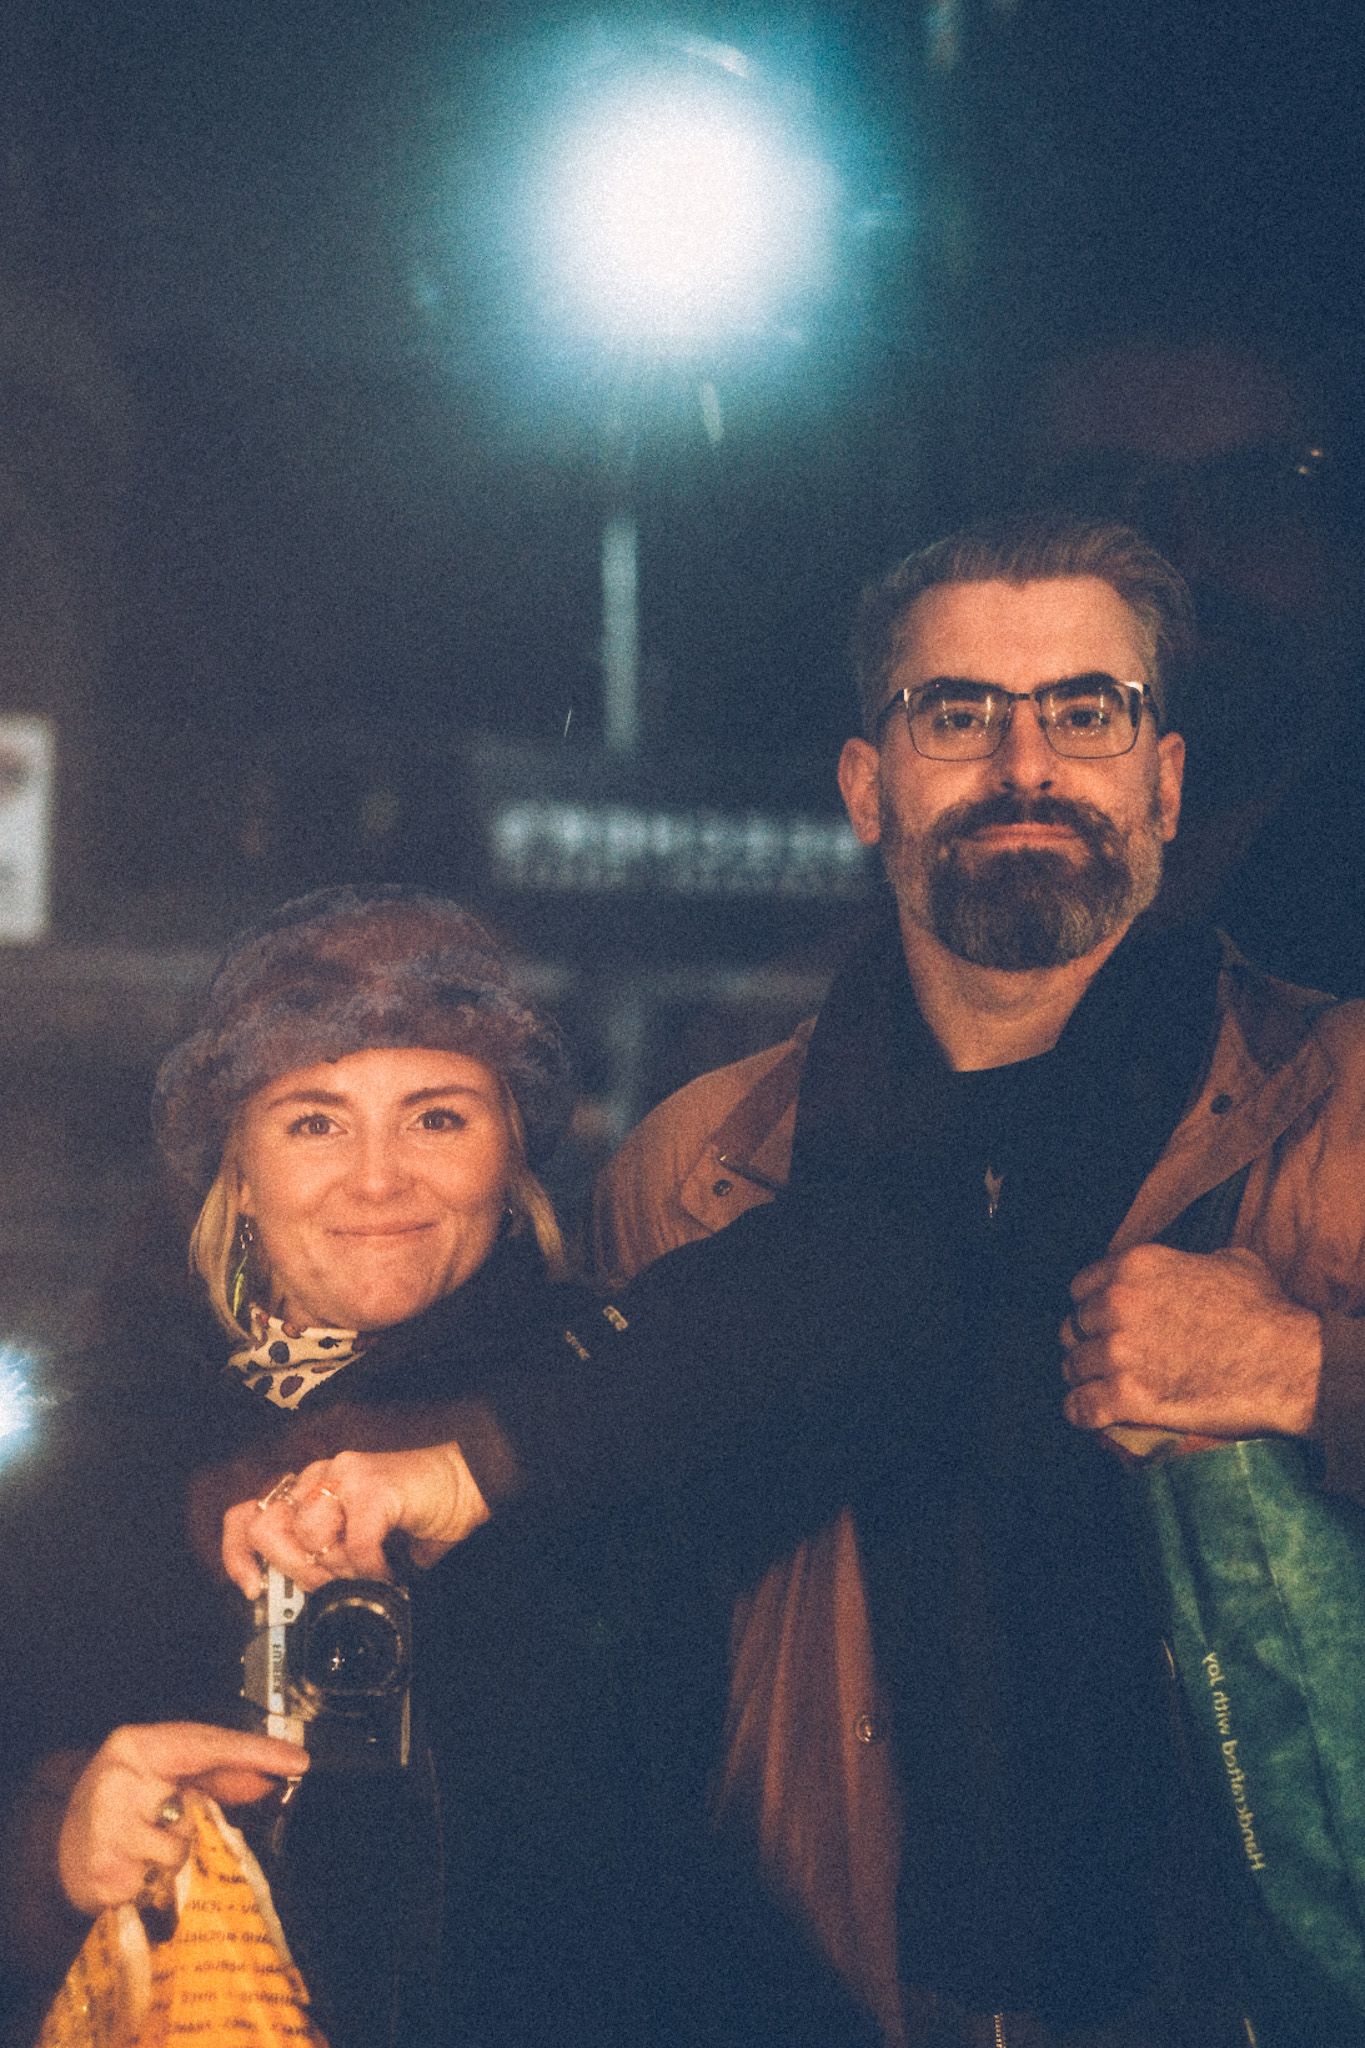 A couple takes a self-portrait in a store window at night, smiling.